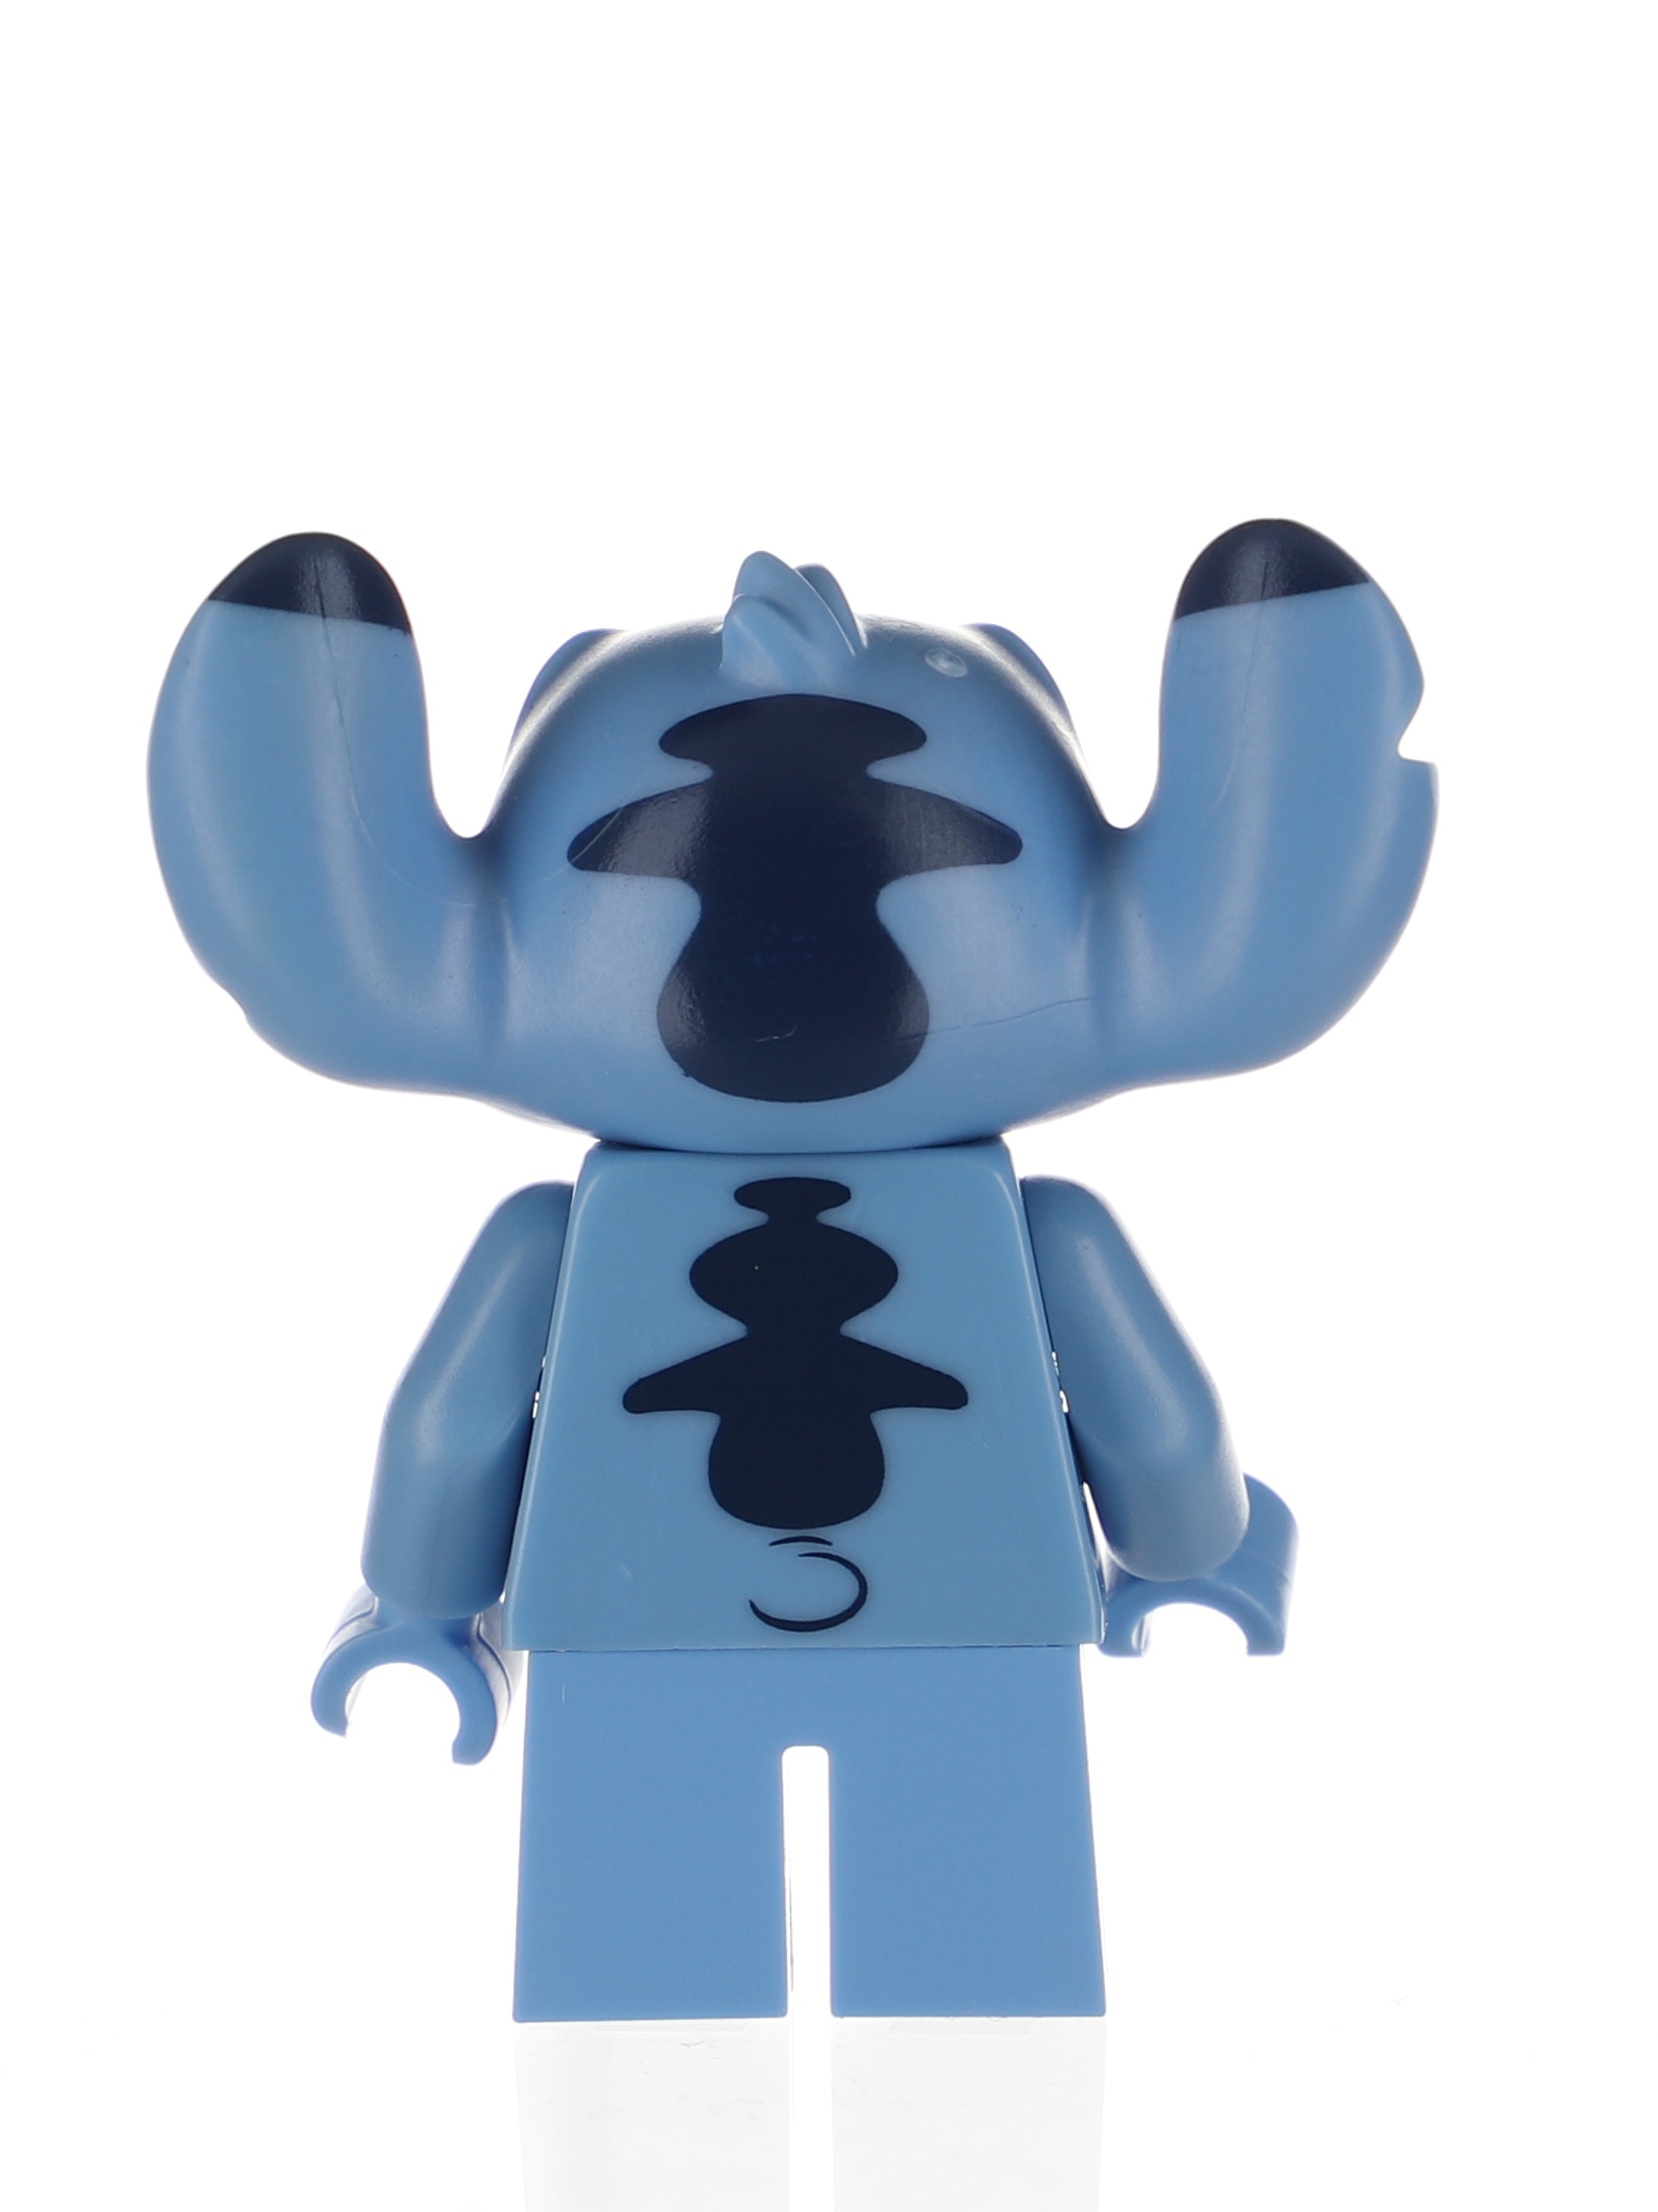 LEGO® dis001 Stitch (without accessories) - ToyPro